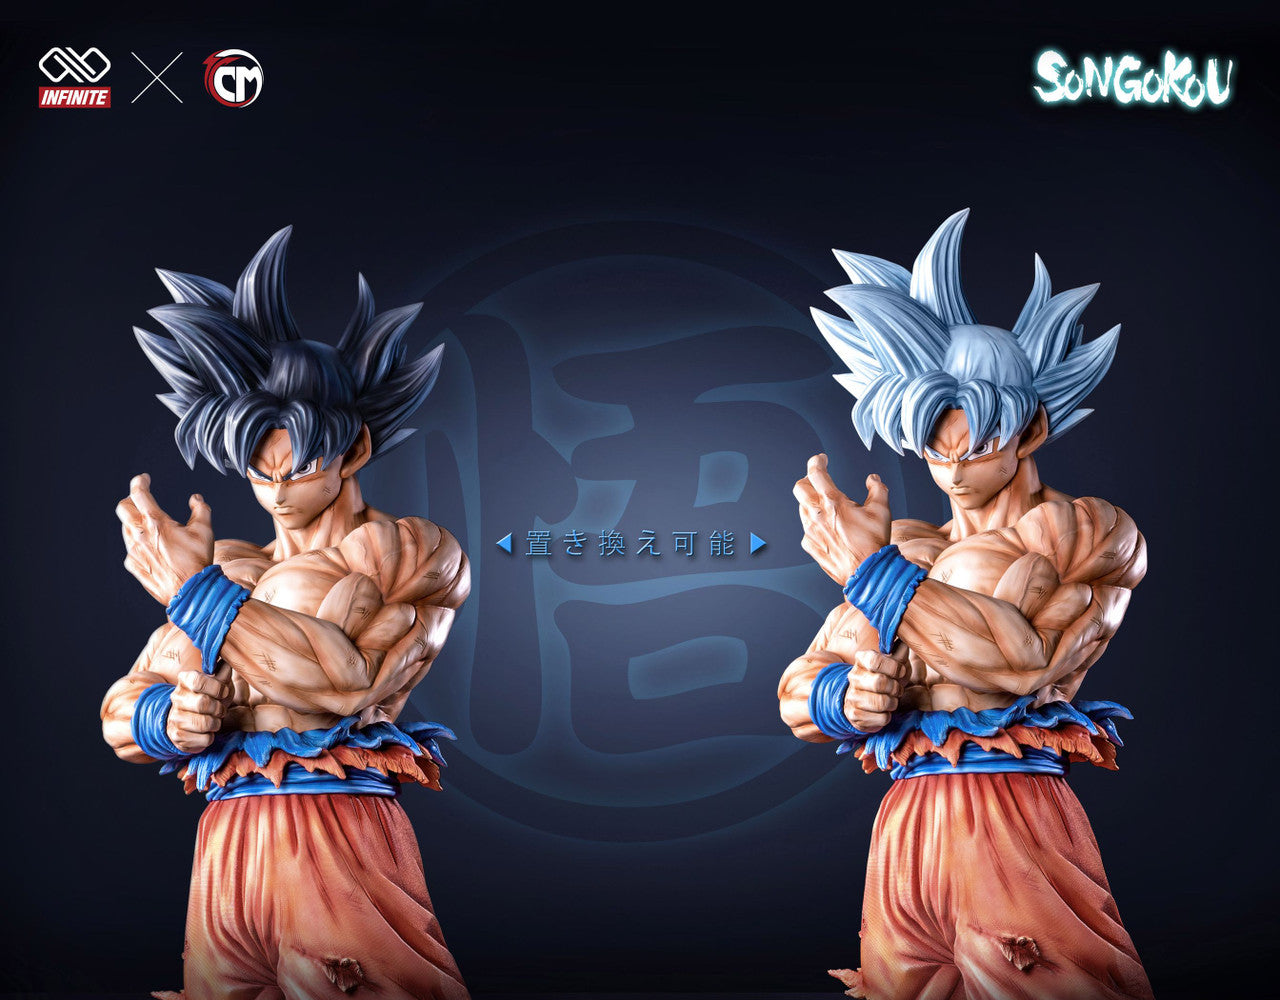 Infinite Studio - Life Size Goku(Price does not Include Shipping)